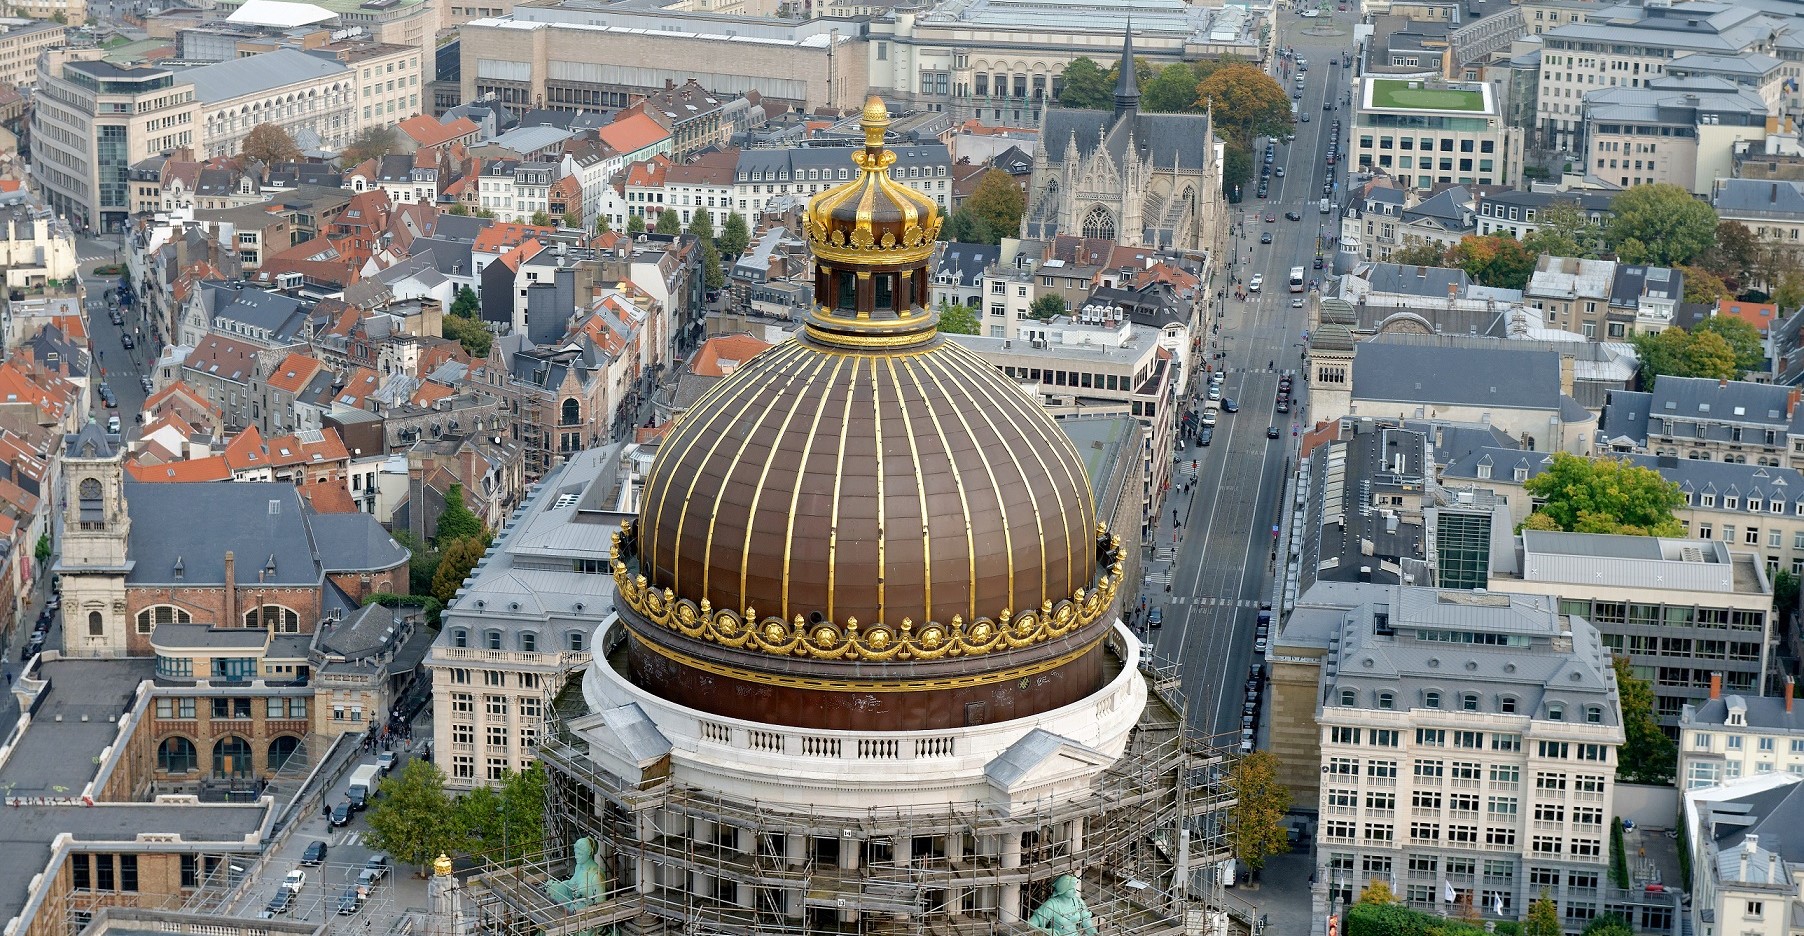 The dome of the Justice Palace from the air